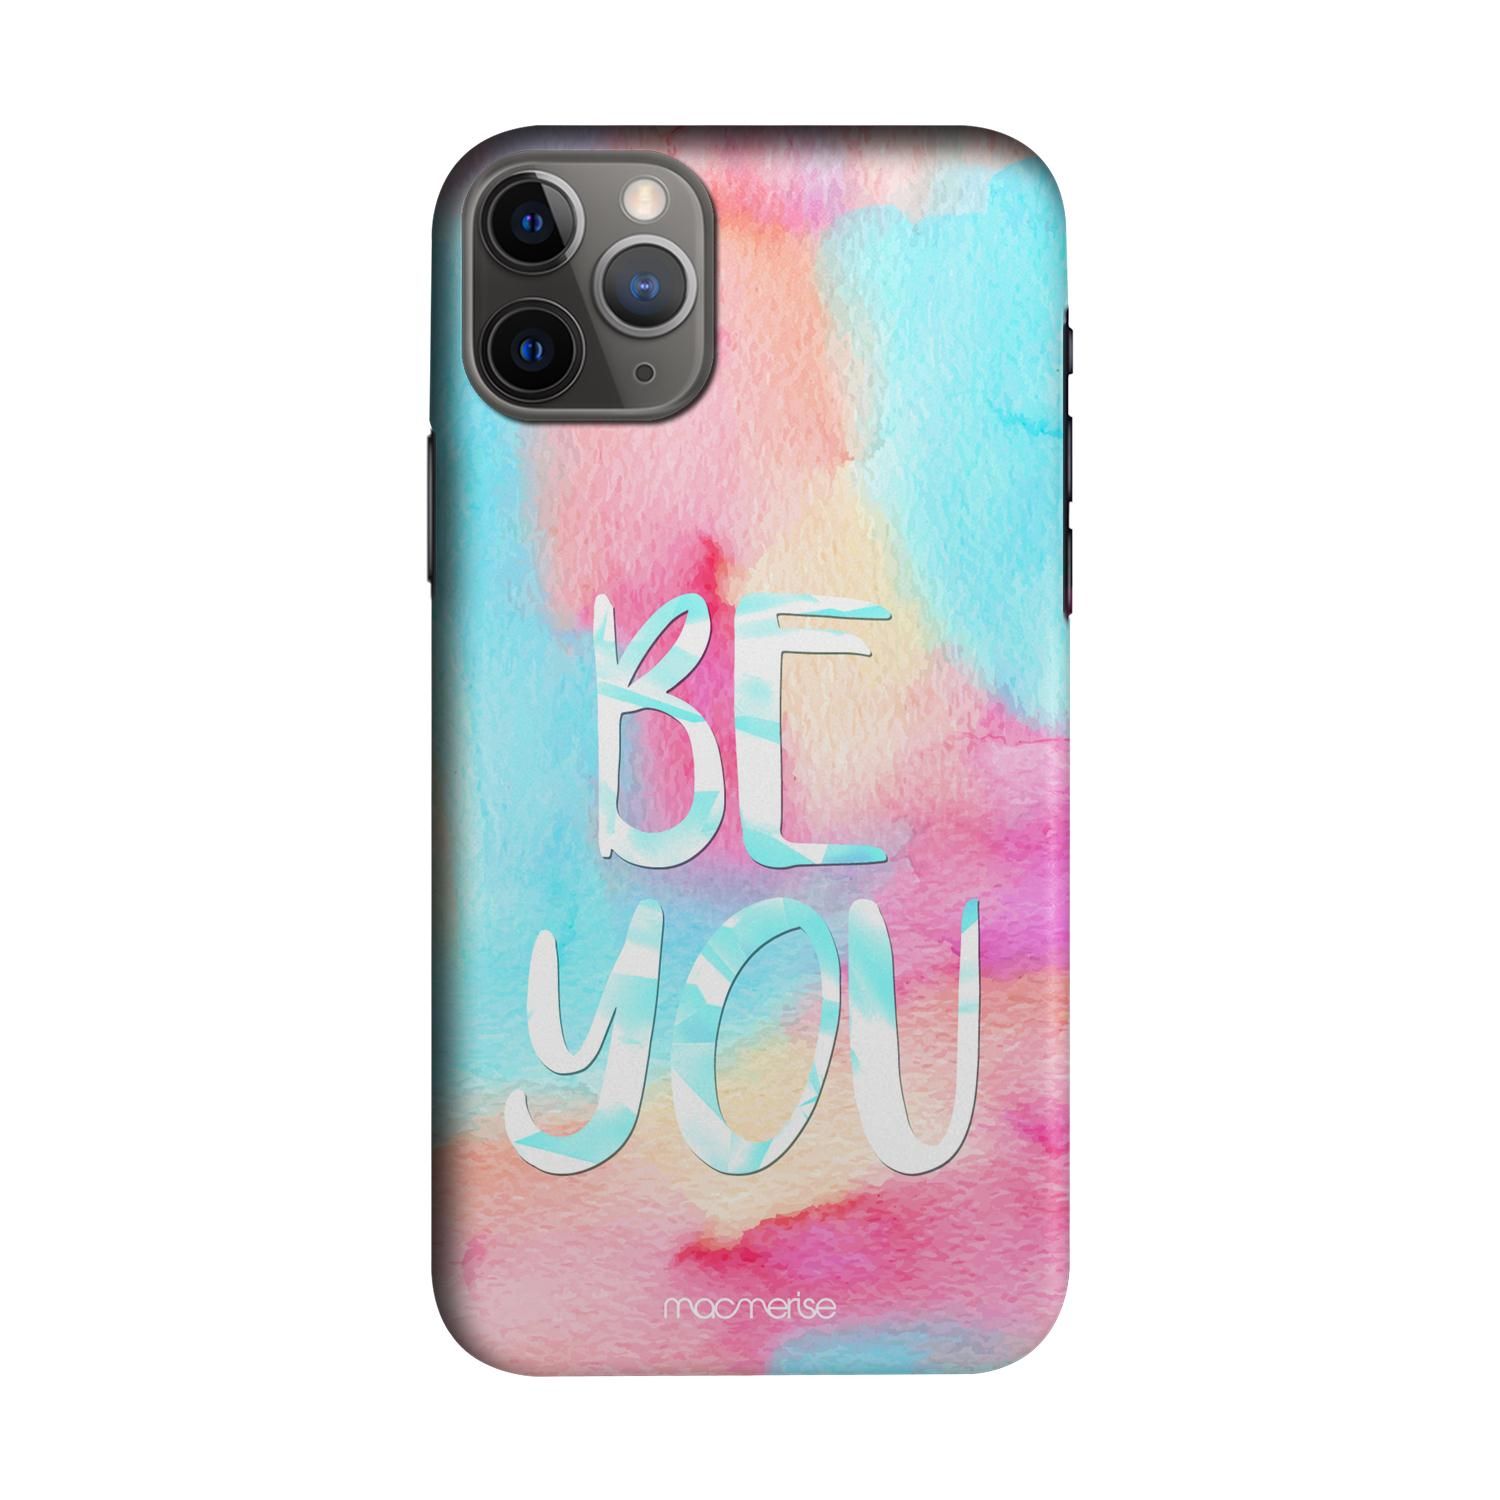 Buy Be You - Sleek Phone Case for iPhone 11 Pro Max Online